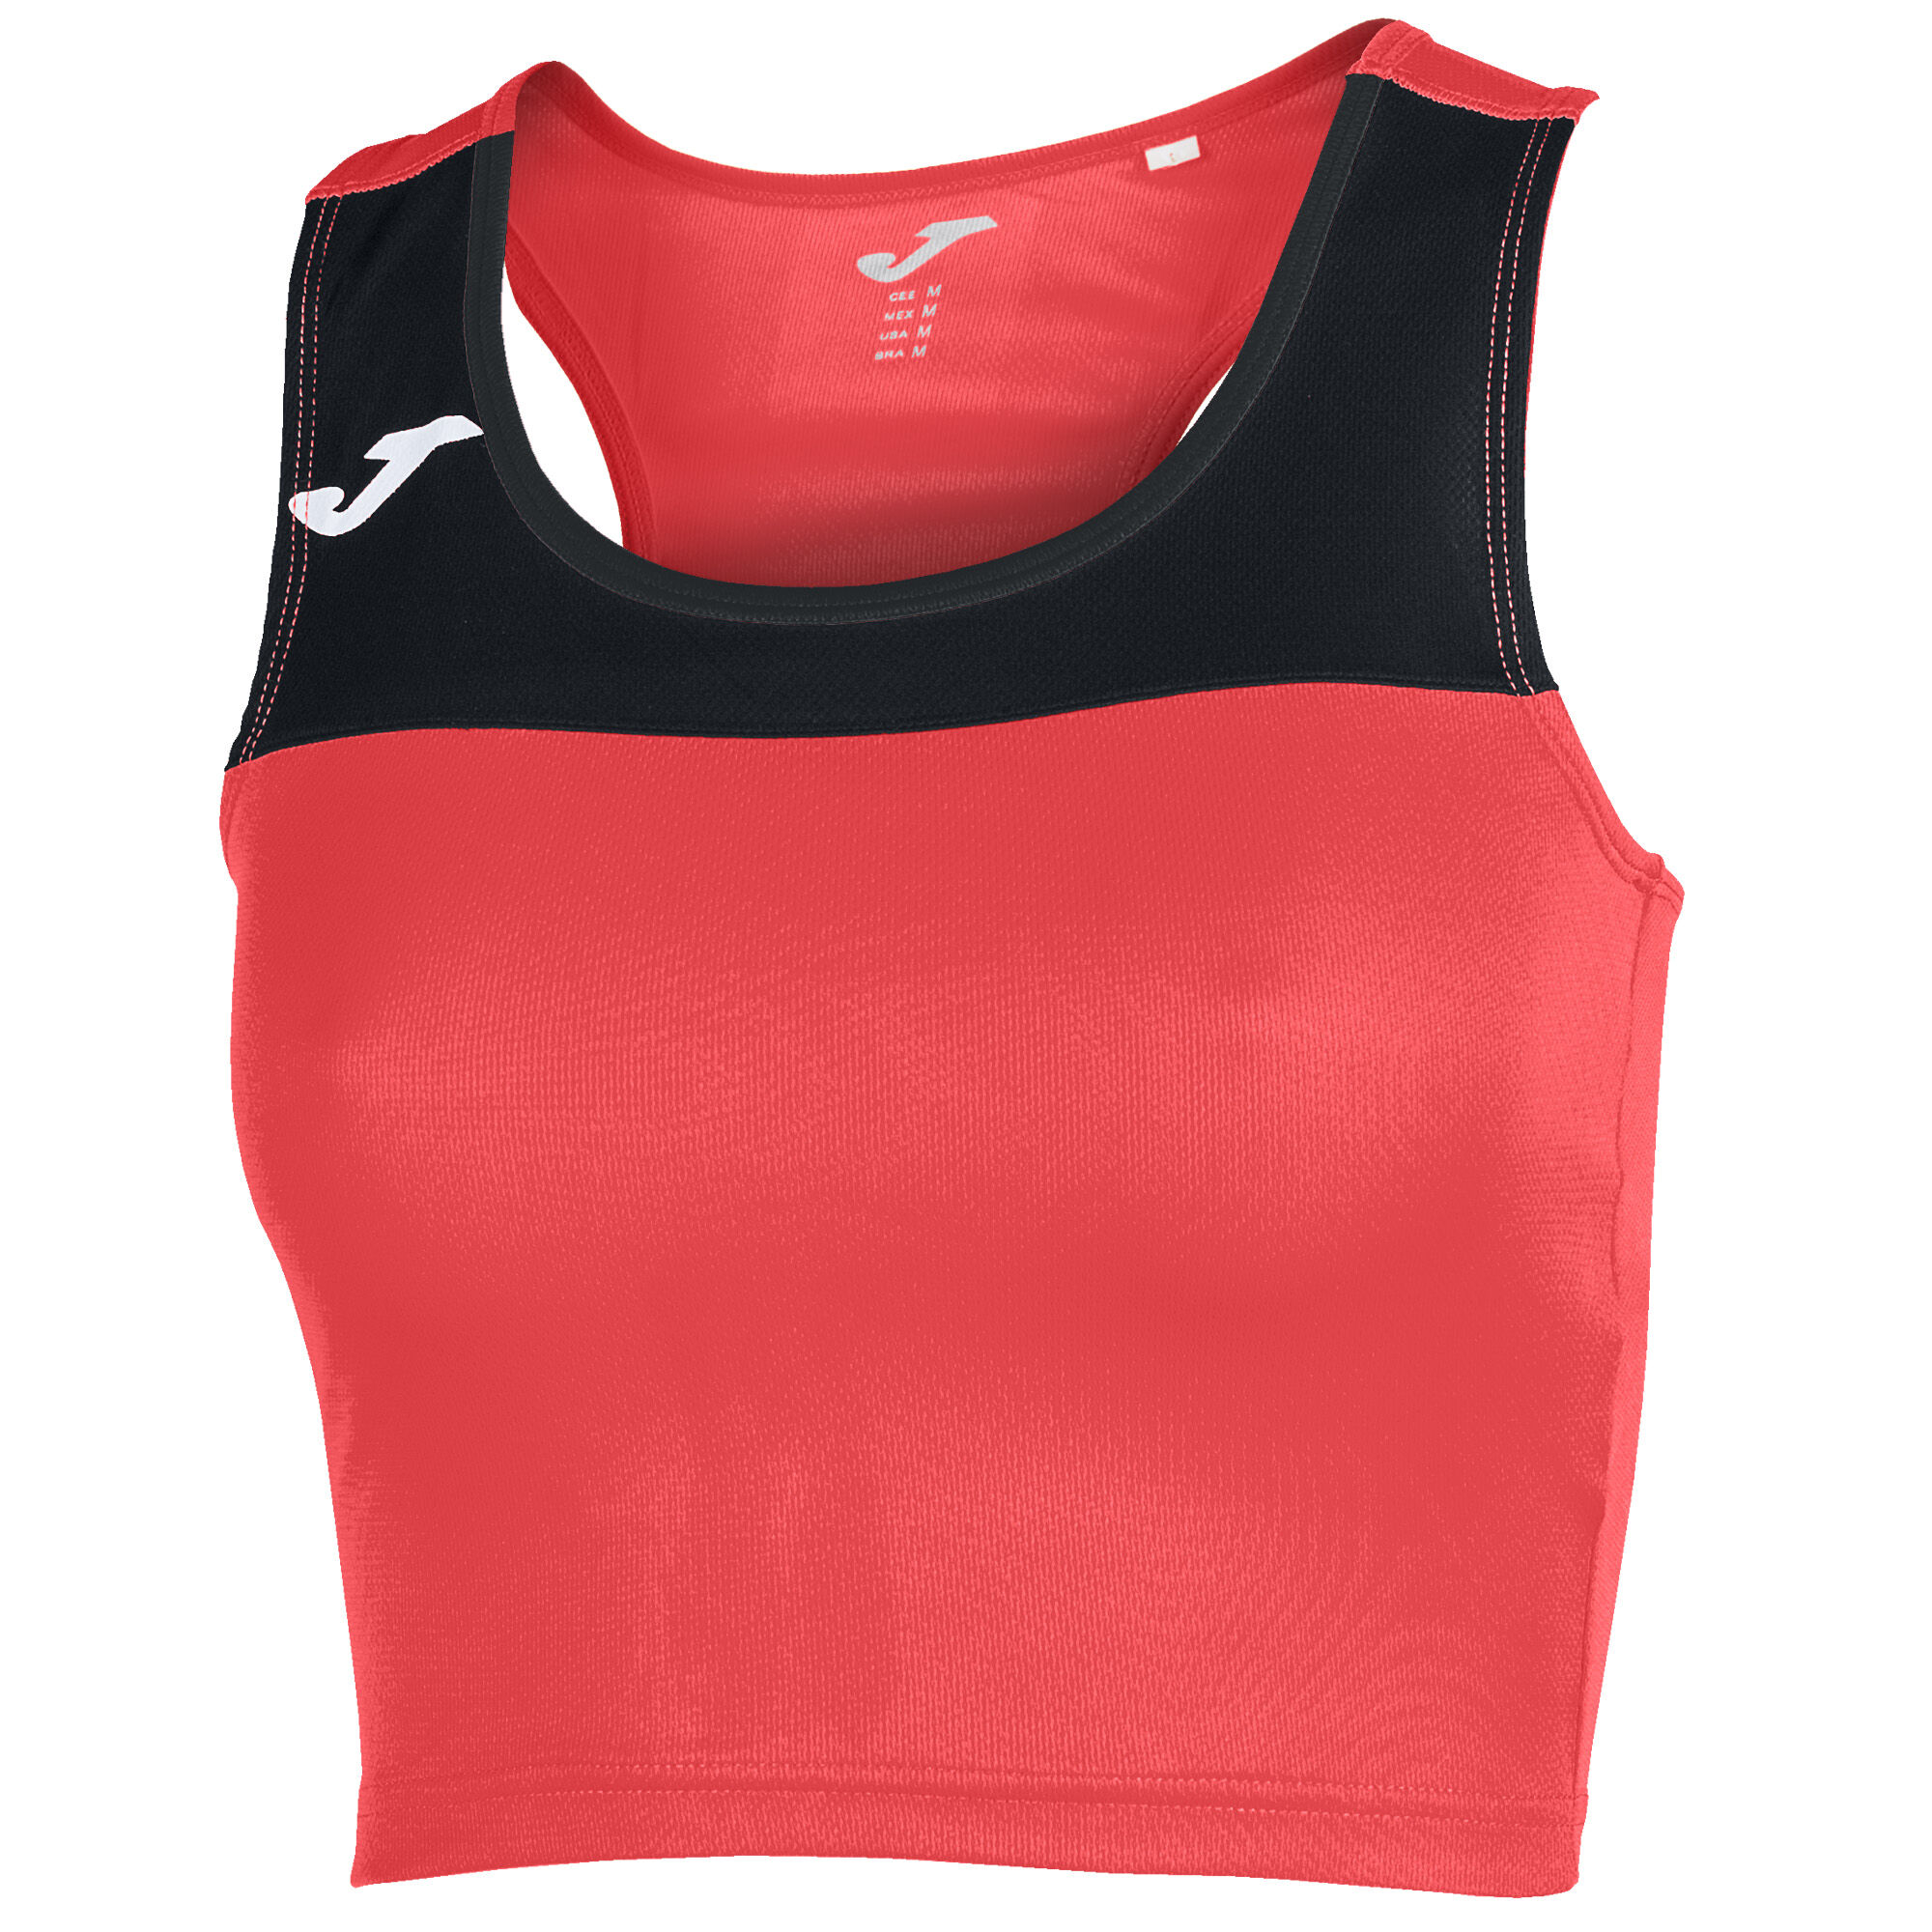 TOP MUJER RACE CORAL NEGRO